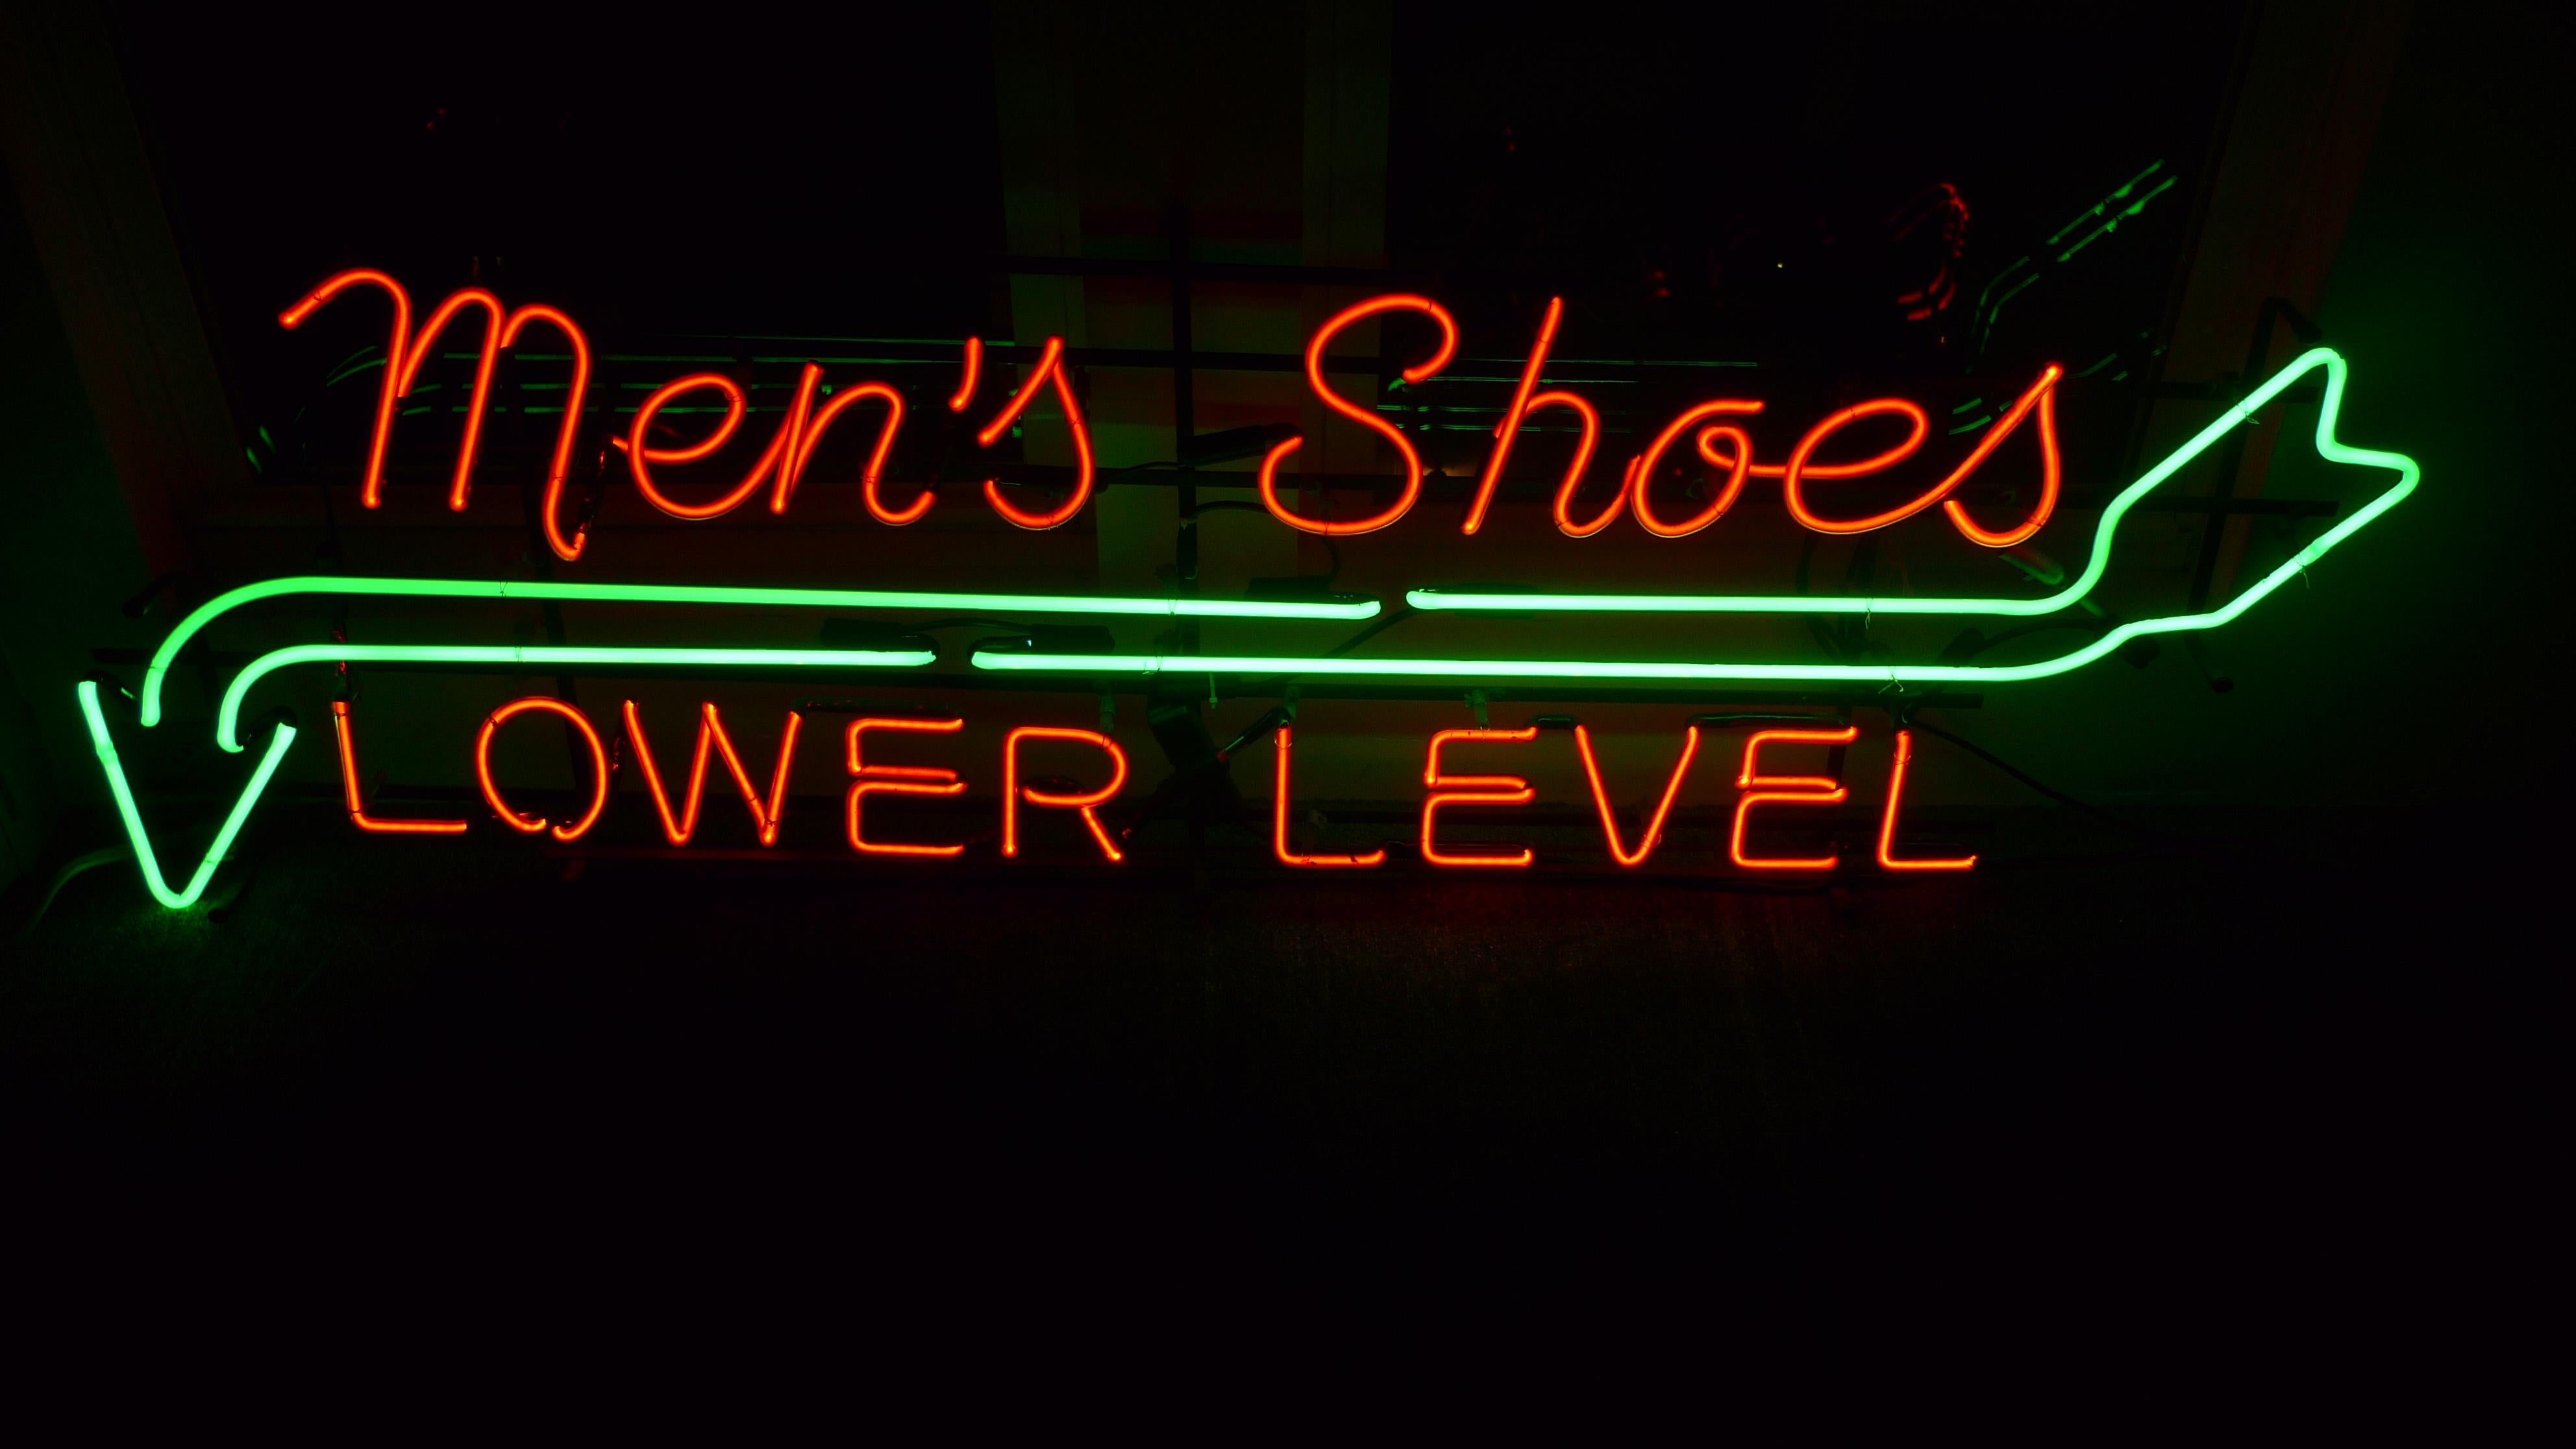 Neon signage from a midwestern department store directing customers to: Men's shoes, Lower Level, circa 1930s. Strikingly colorful in red-orange and green neon designed around a symbolic arrow splitting cursive and sans serif type. Haute design at